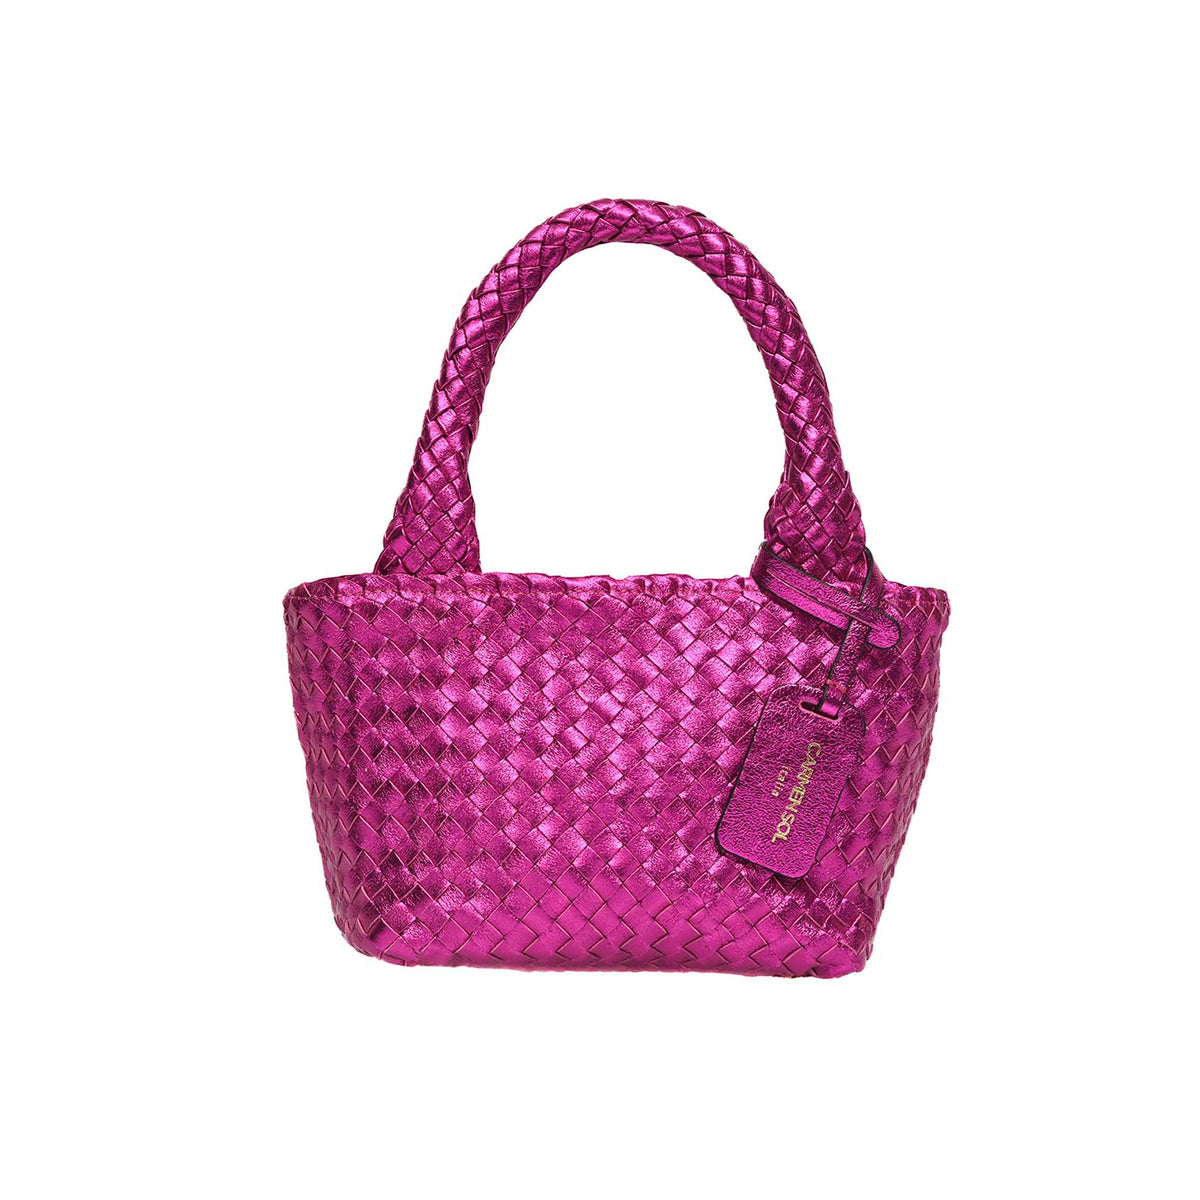 Mini leather bag purple in color best for shopping lovers &quot;Italia&quot; collection from Carmen Sol